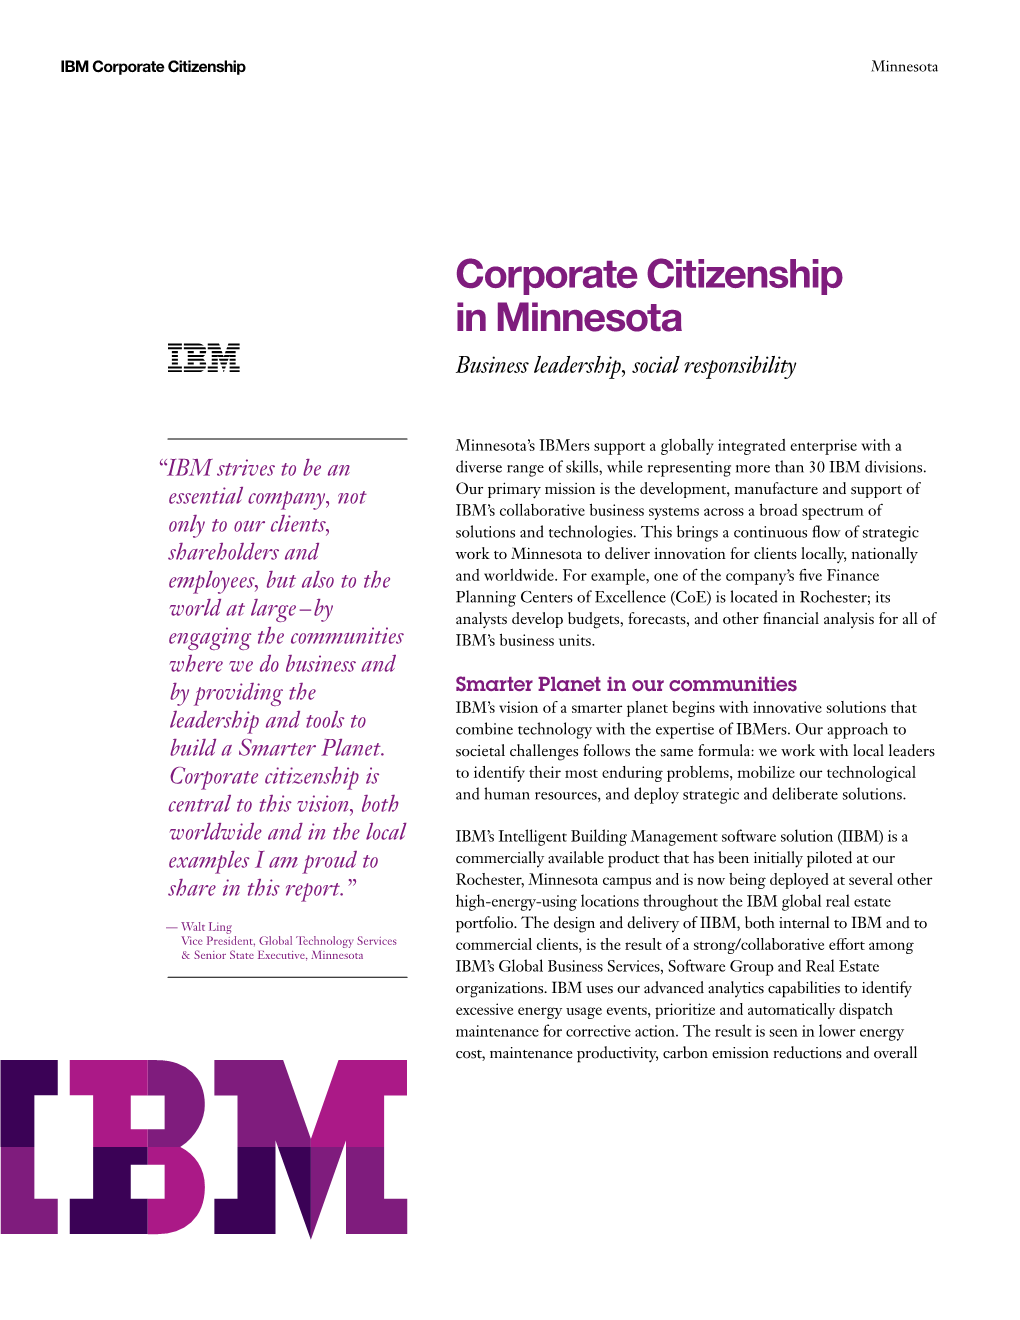 Corporate Citizenship in Minnesota Business Leadership, Social Responsibility